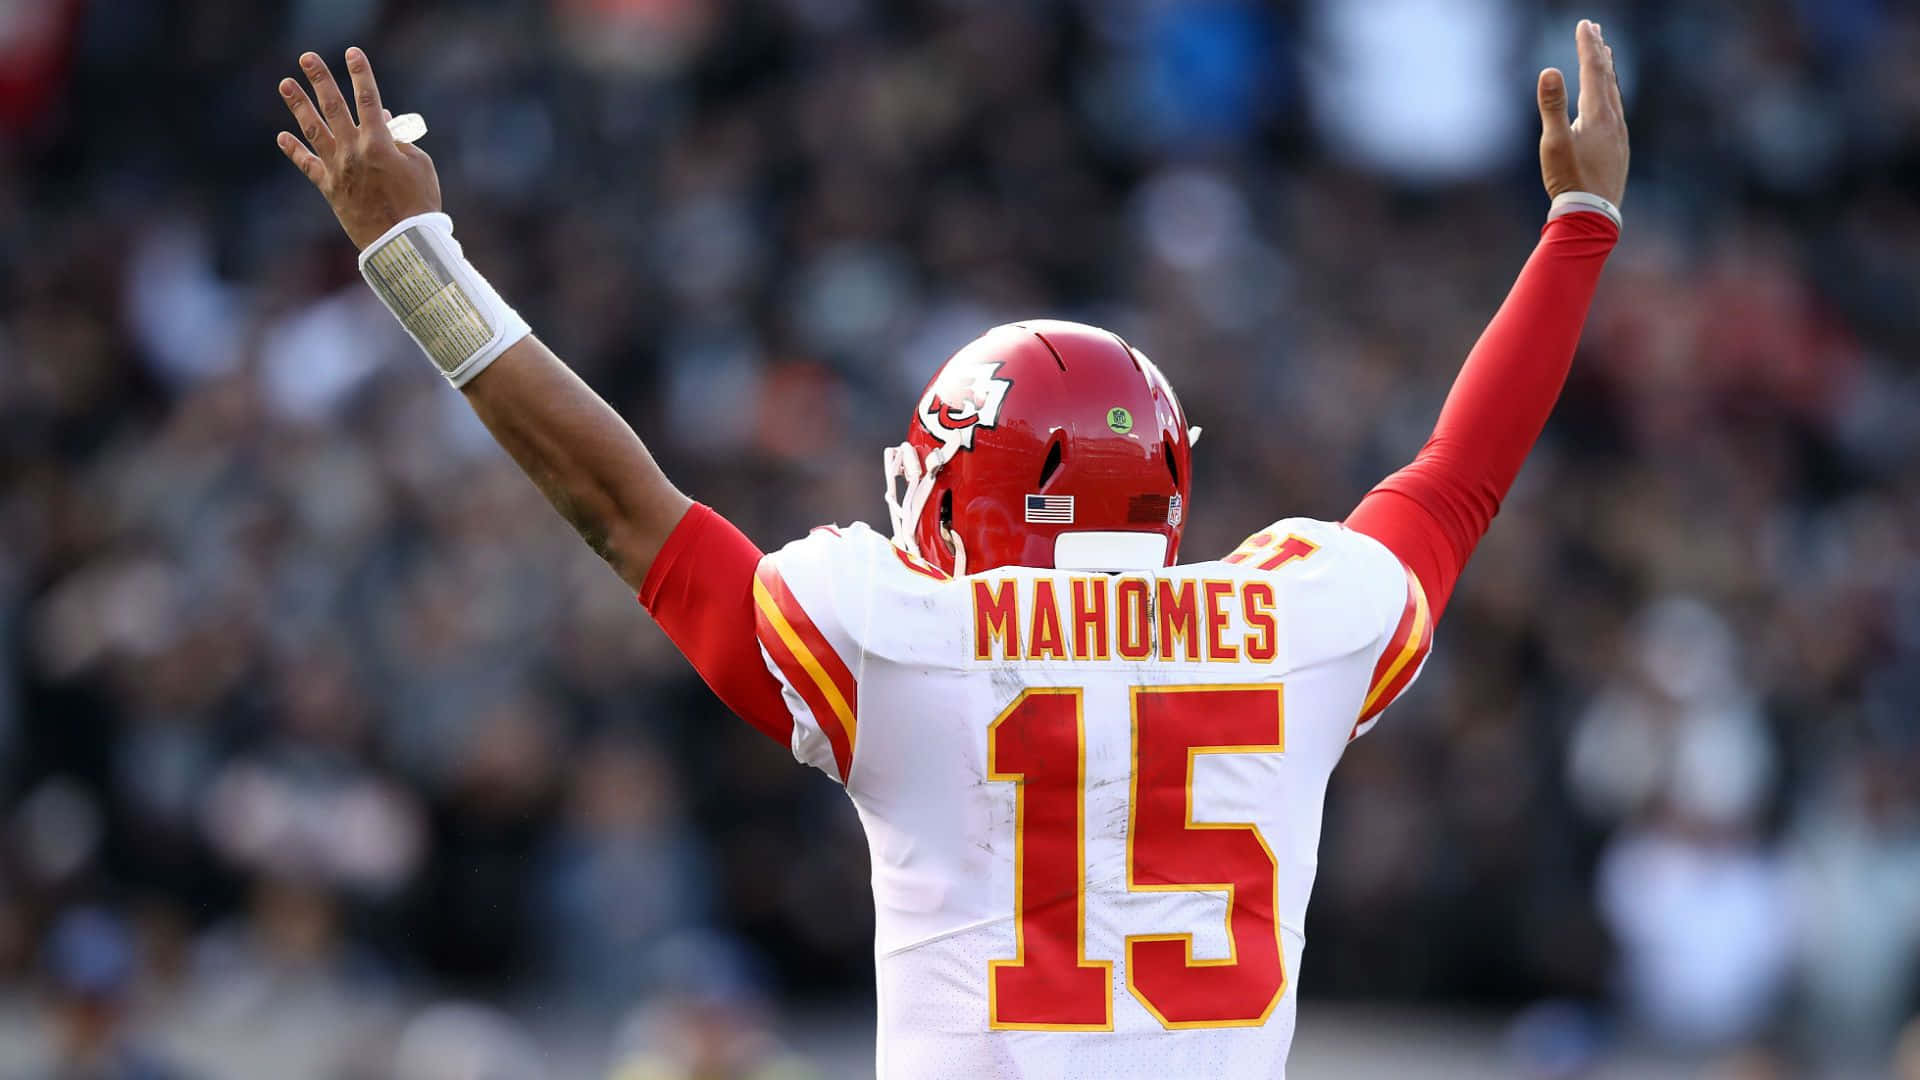 Patrick Mahomes in Action during NFL Game